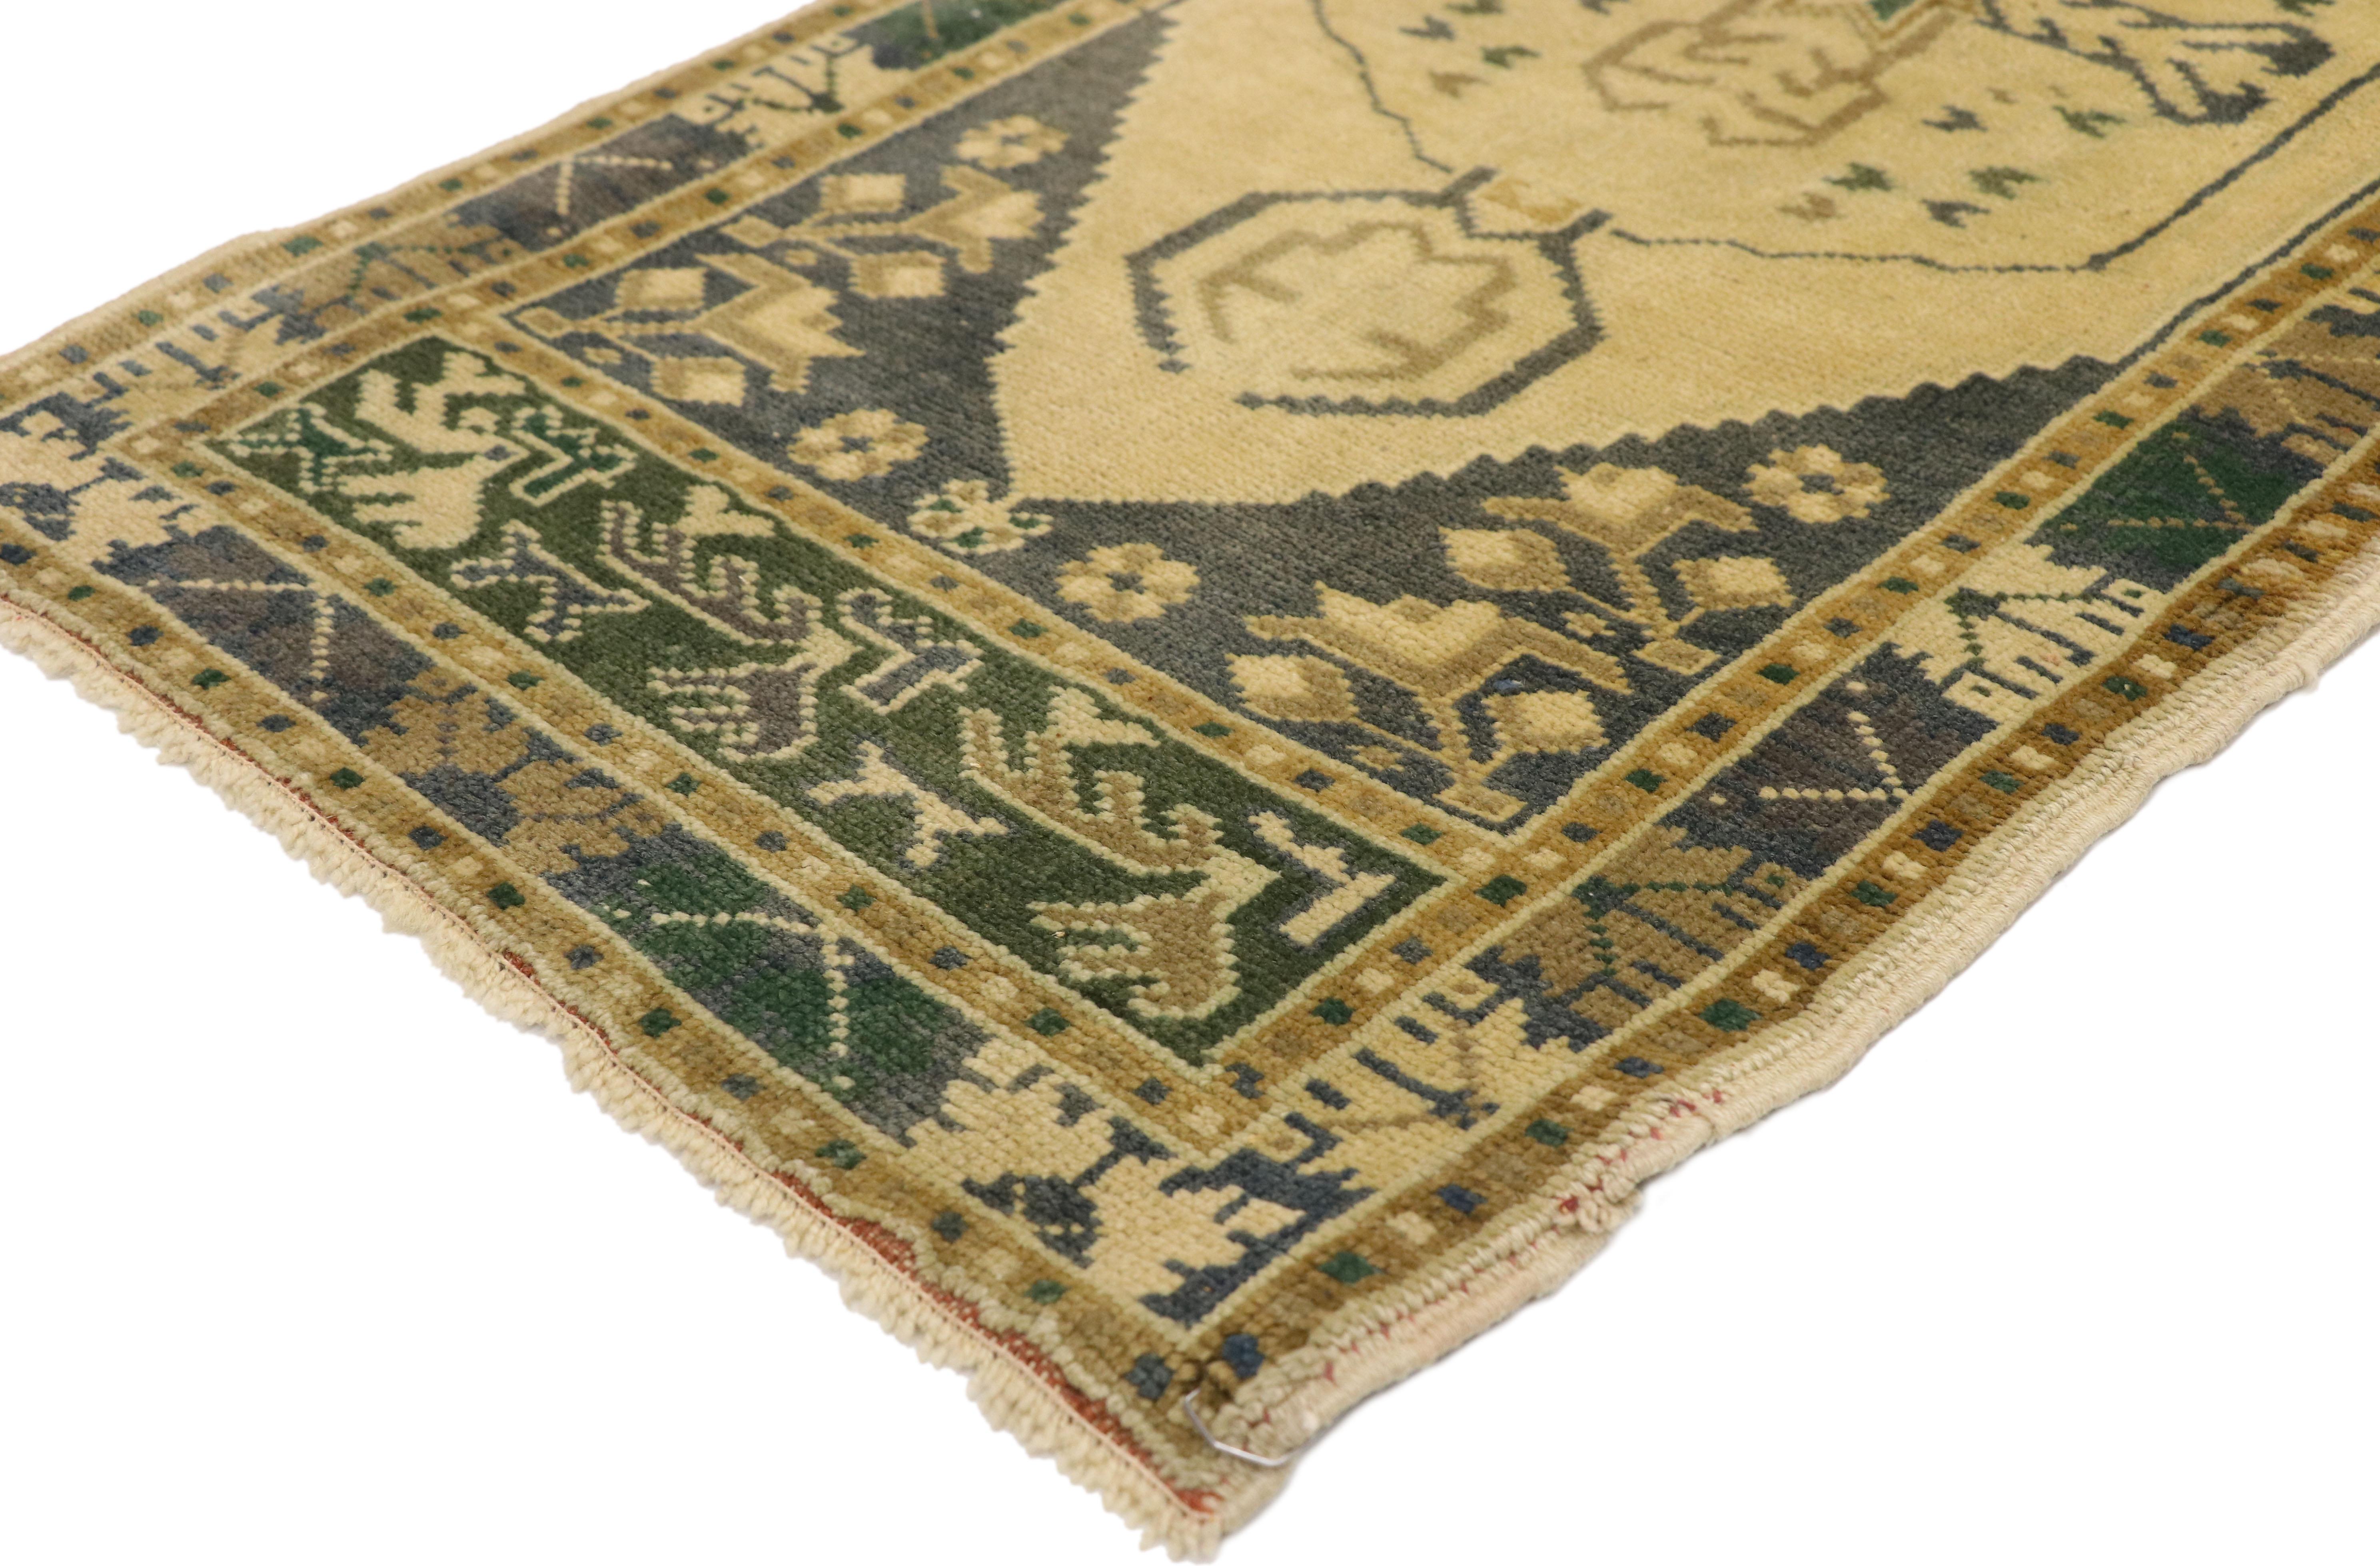 50610 Vintage Turkish Oushak Yastik Scatter Rug, Small Accent Rug 01'09 x 03'10. This hand knotted wool vintage Turkish Oushak yastik scatter rug features a hexagonal central medallion patterned inside with a cross motif, eight-point star, and